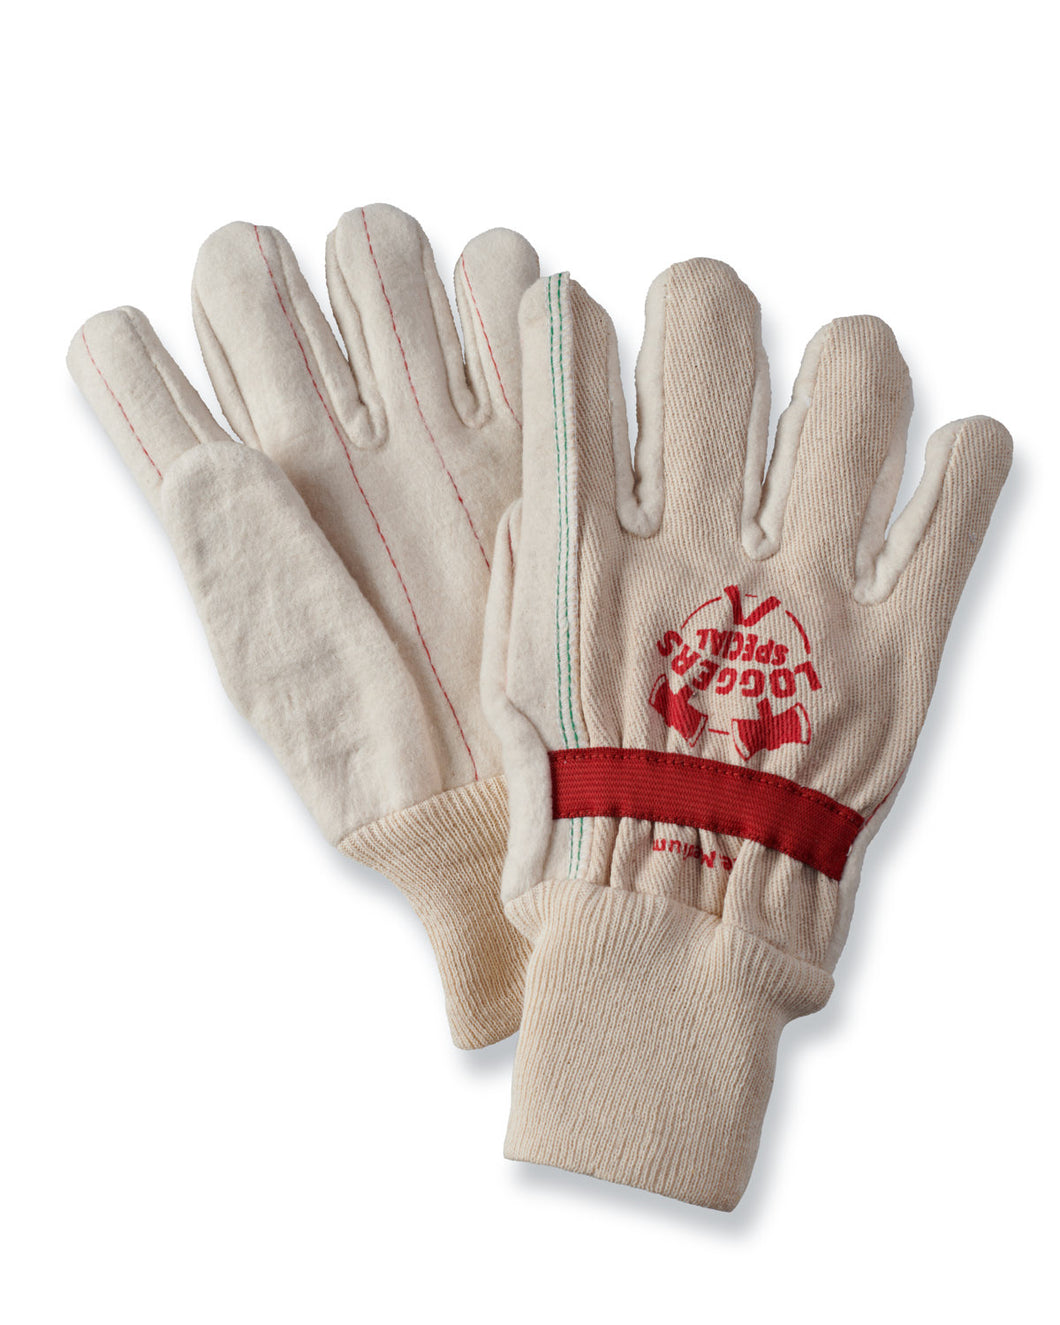 Logger Work Gloves for Forestry Service 12 Pair Pack